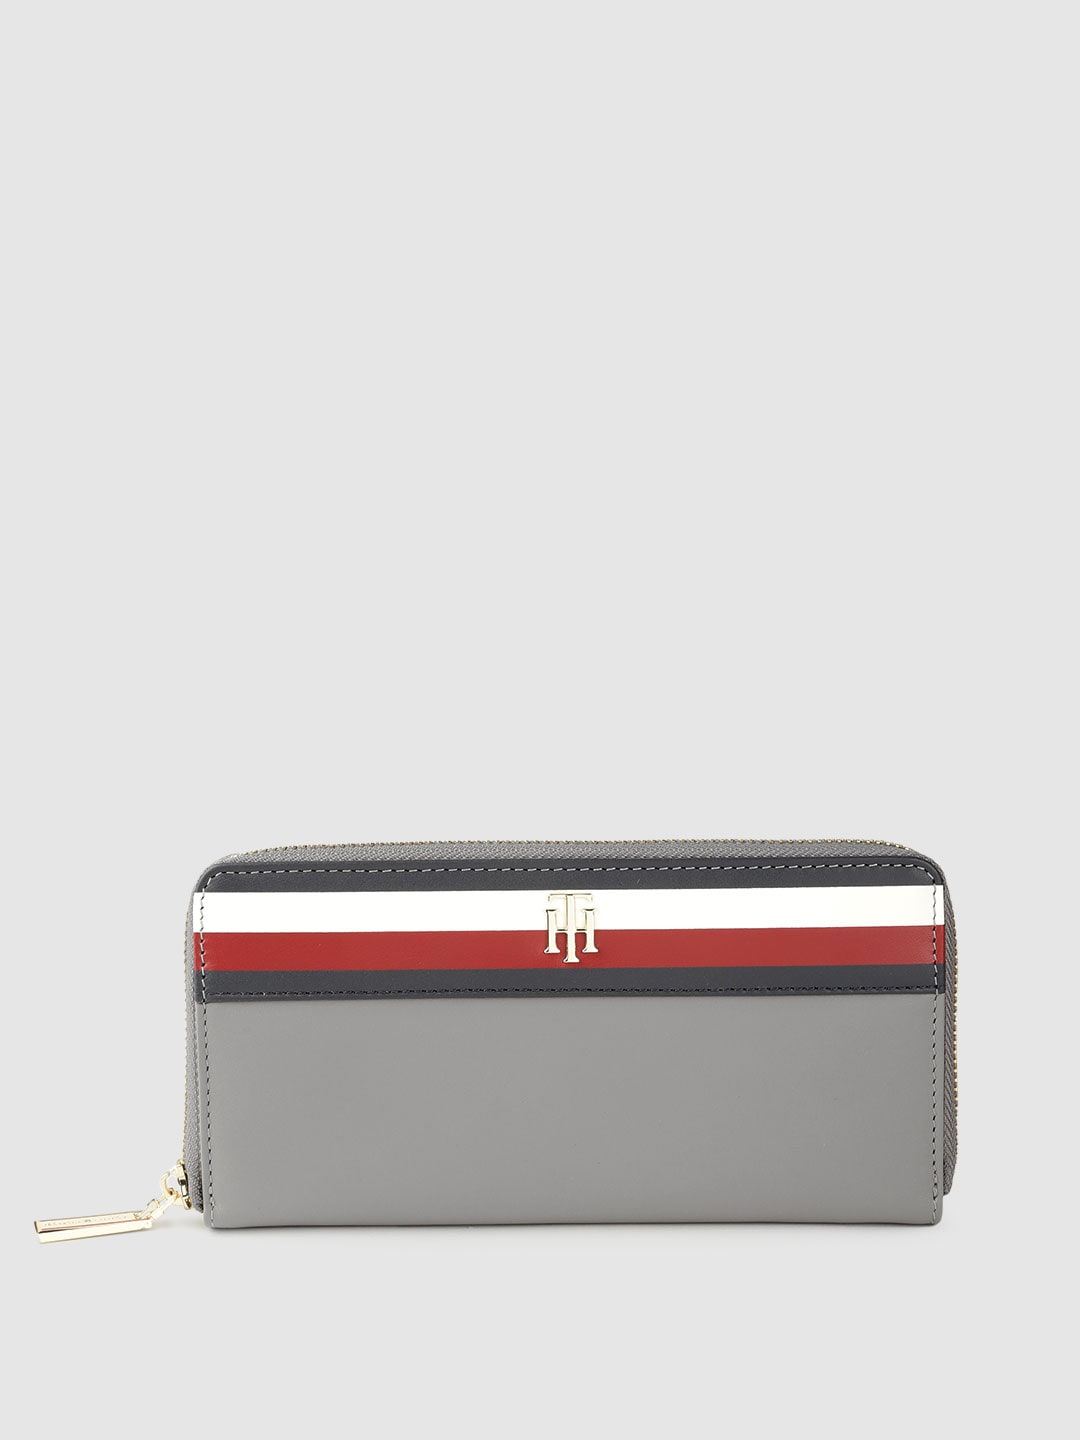 Tommy Hilfiger Women Grey & White Two Fold Leather Wallet Price in India